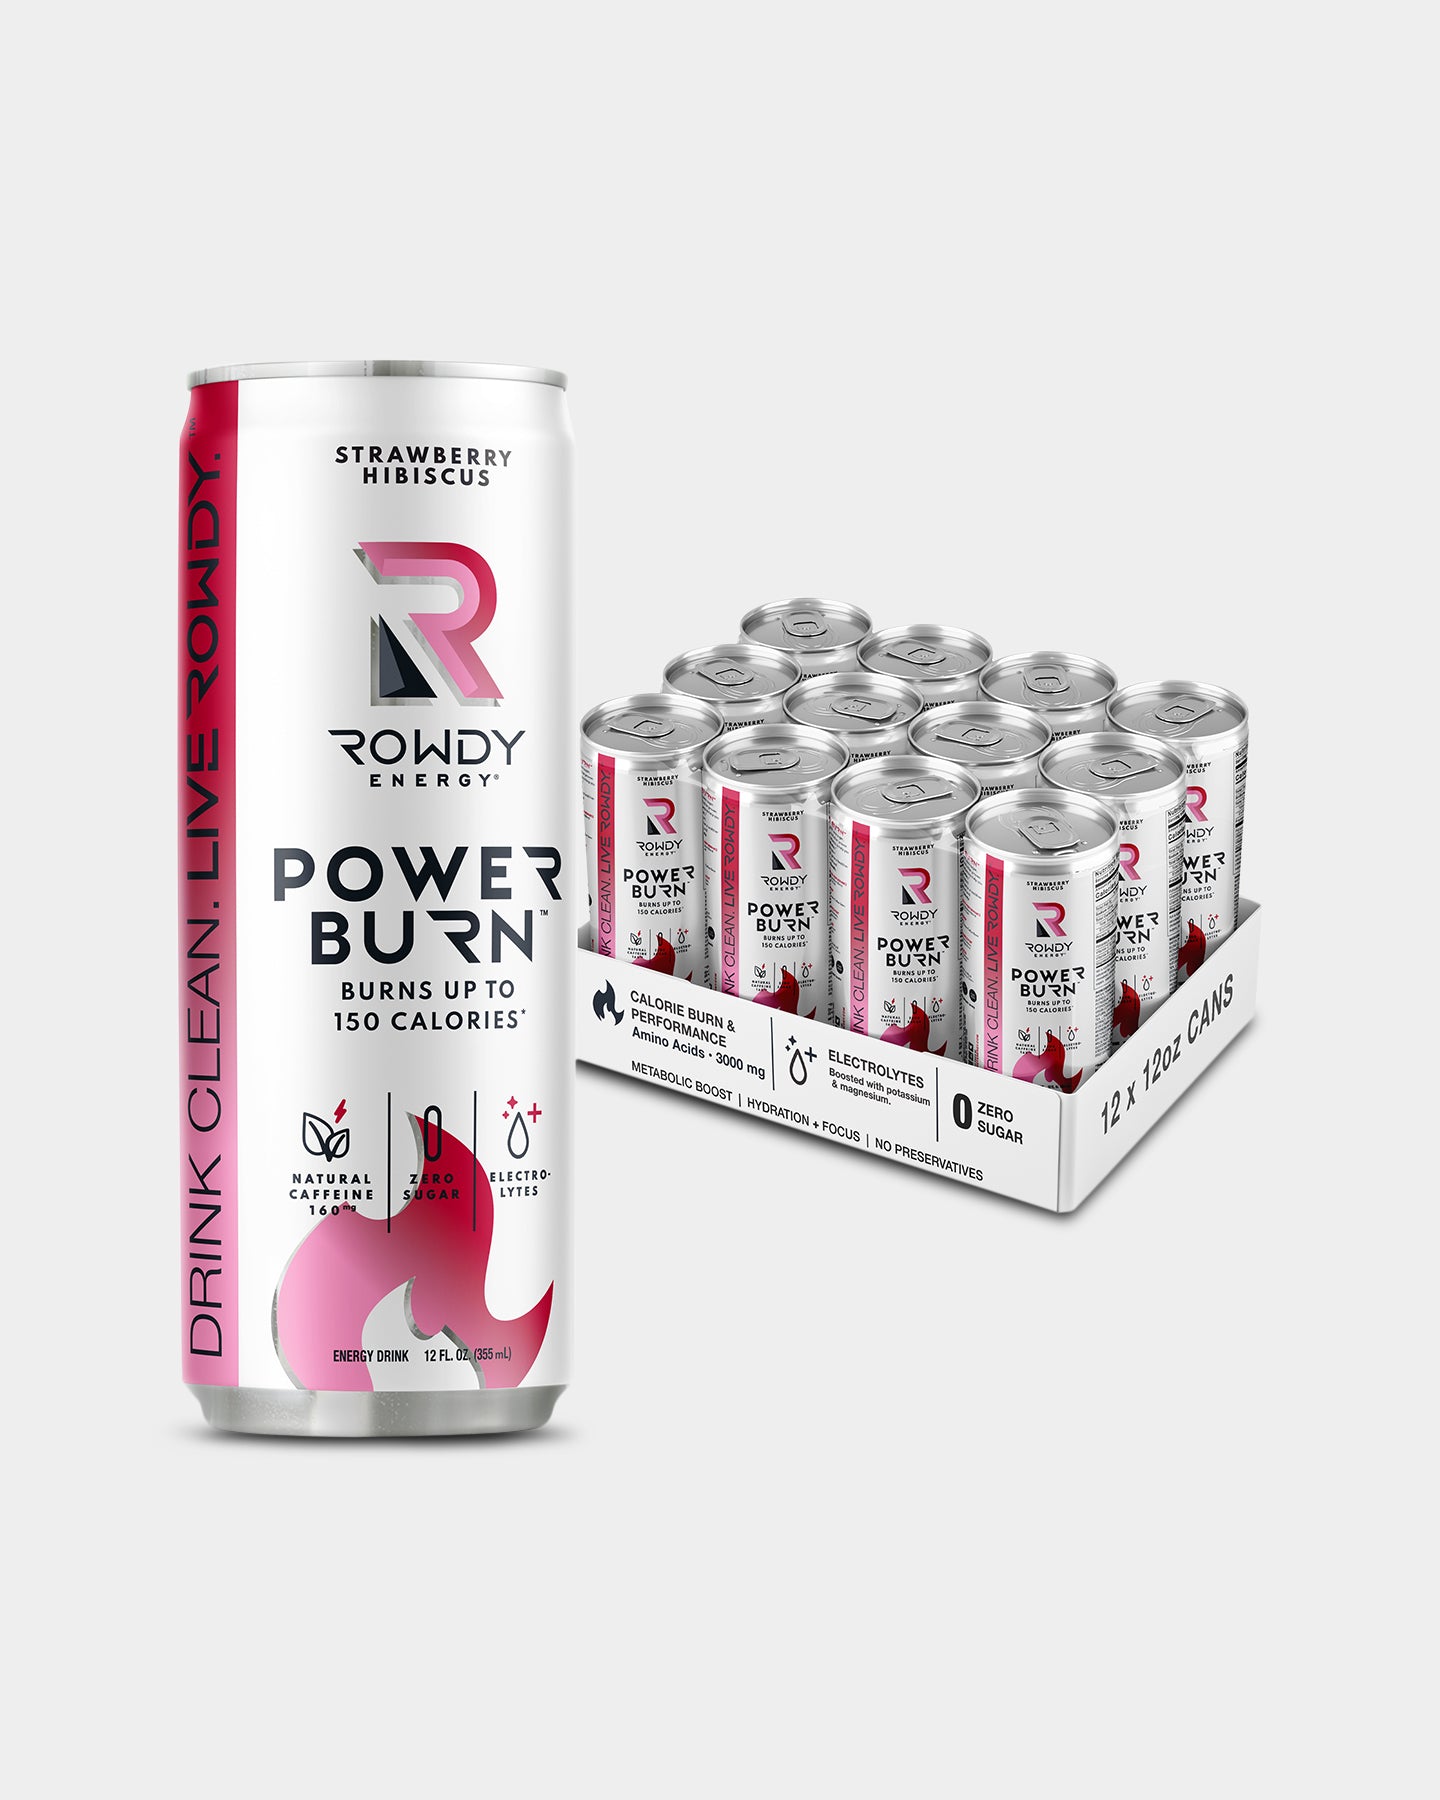 Rowdy Energy Power Burn Energy Drink, Strawberry Hibiscus, 12-Pack A1